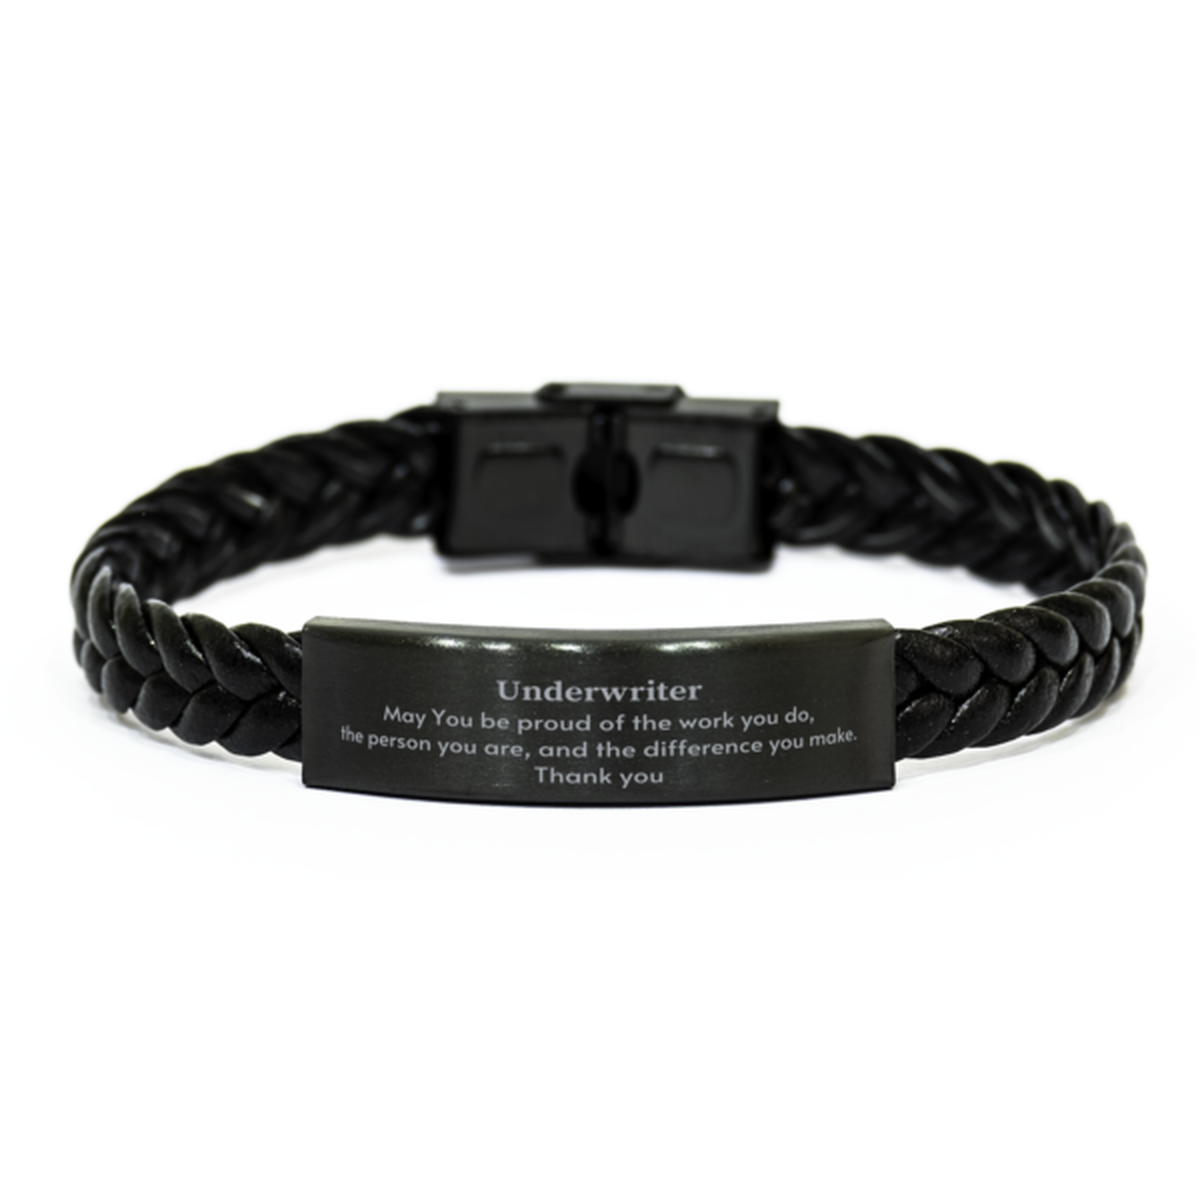 Heartwarming Braided Leather Bracelet Retirement Coworkers Gifts for Underwriter, Underwriter May You be proud of the work you do, the person you are Gifts for Boss Men Women Friends